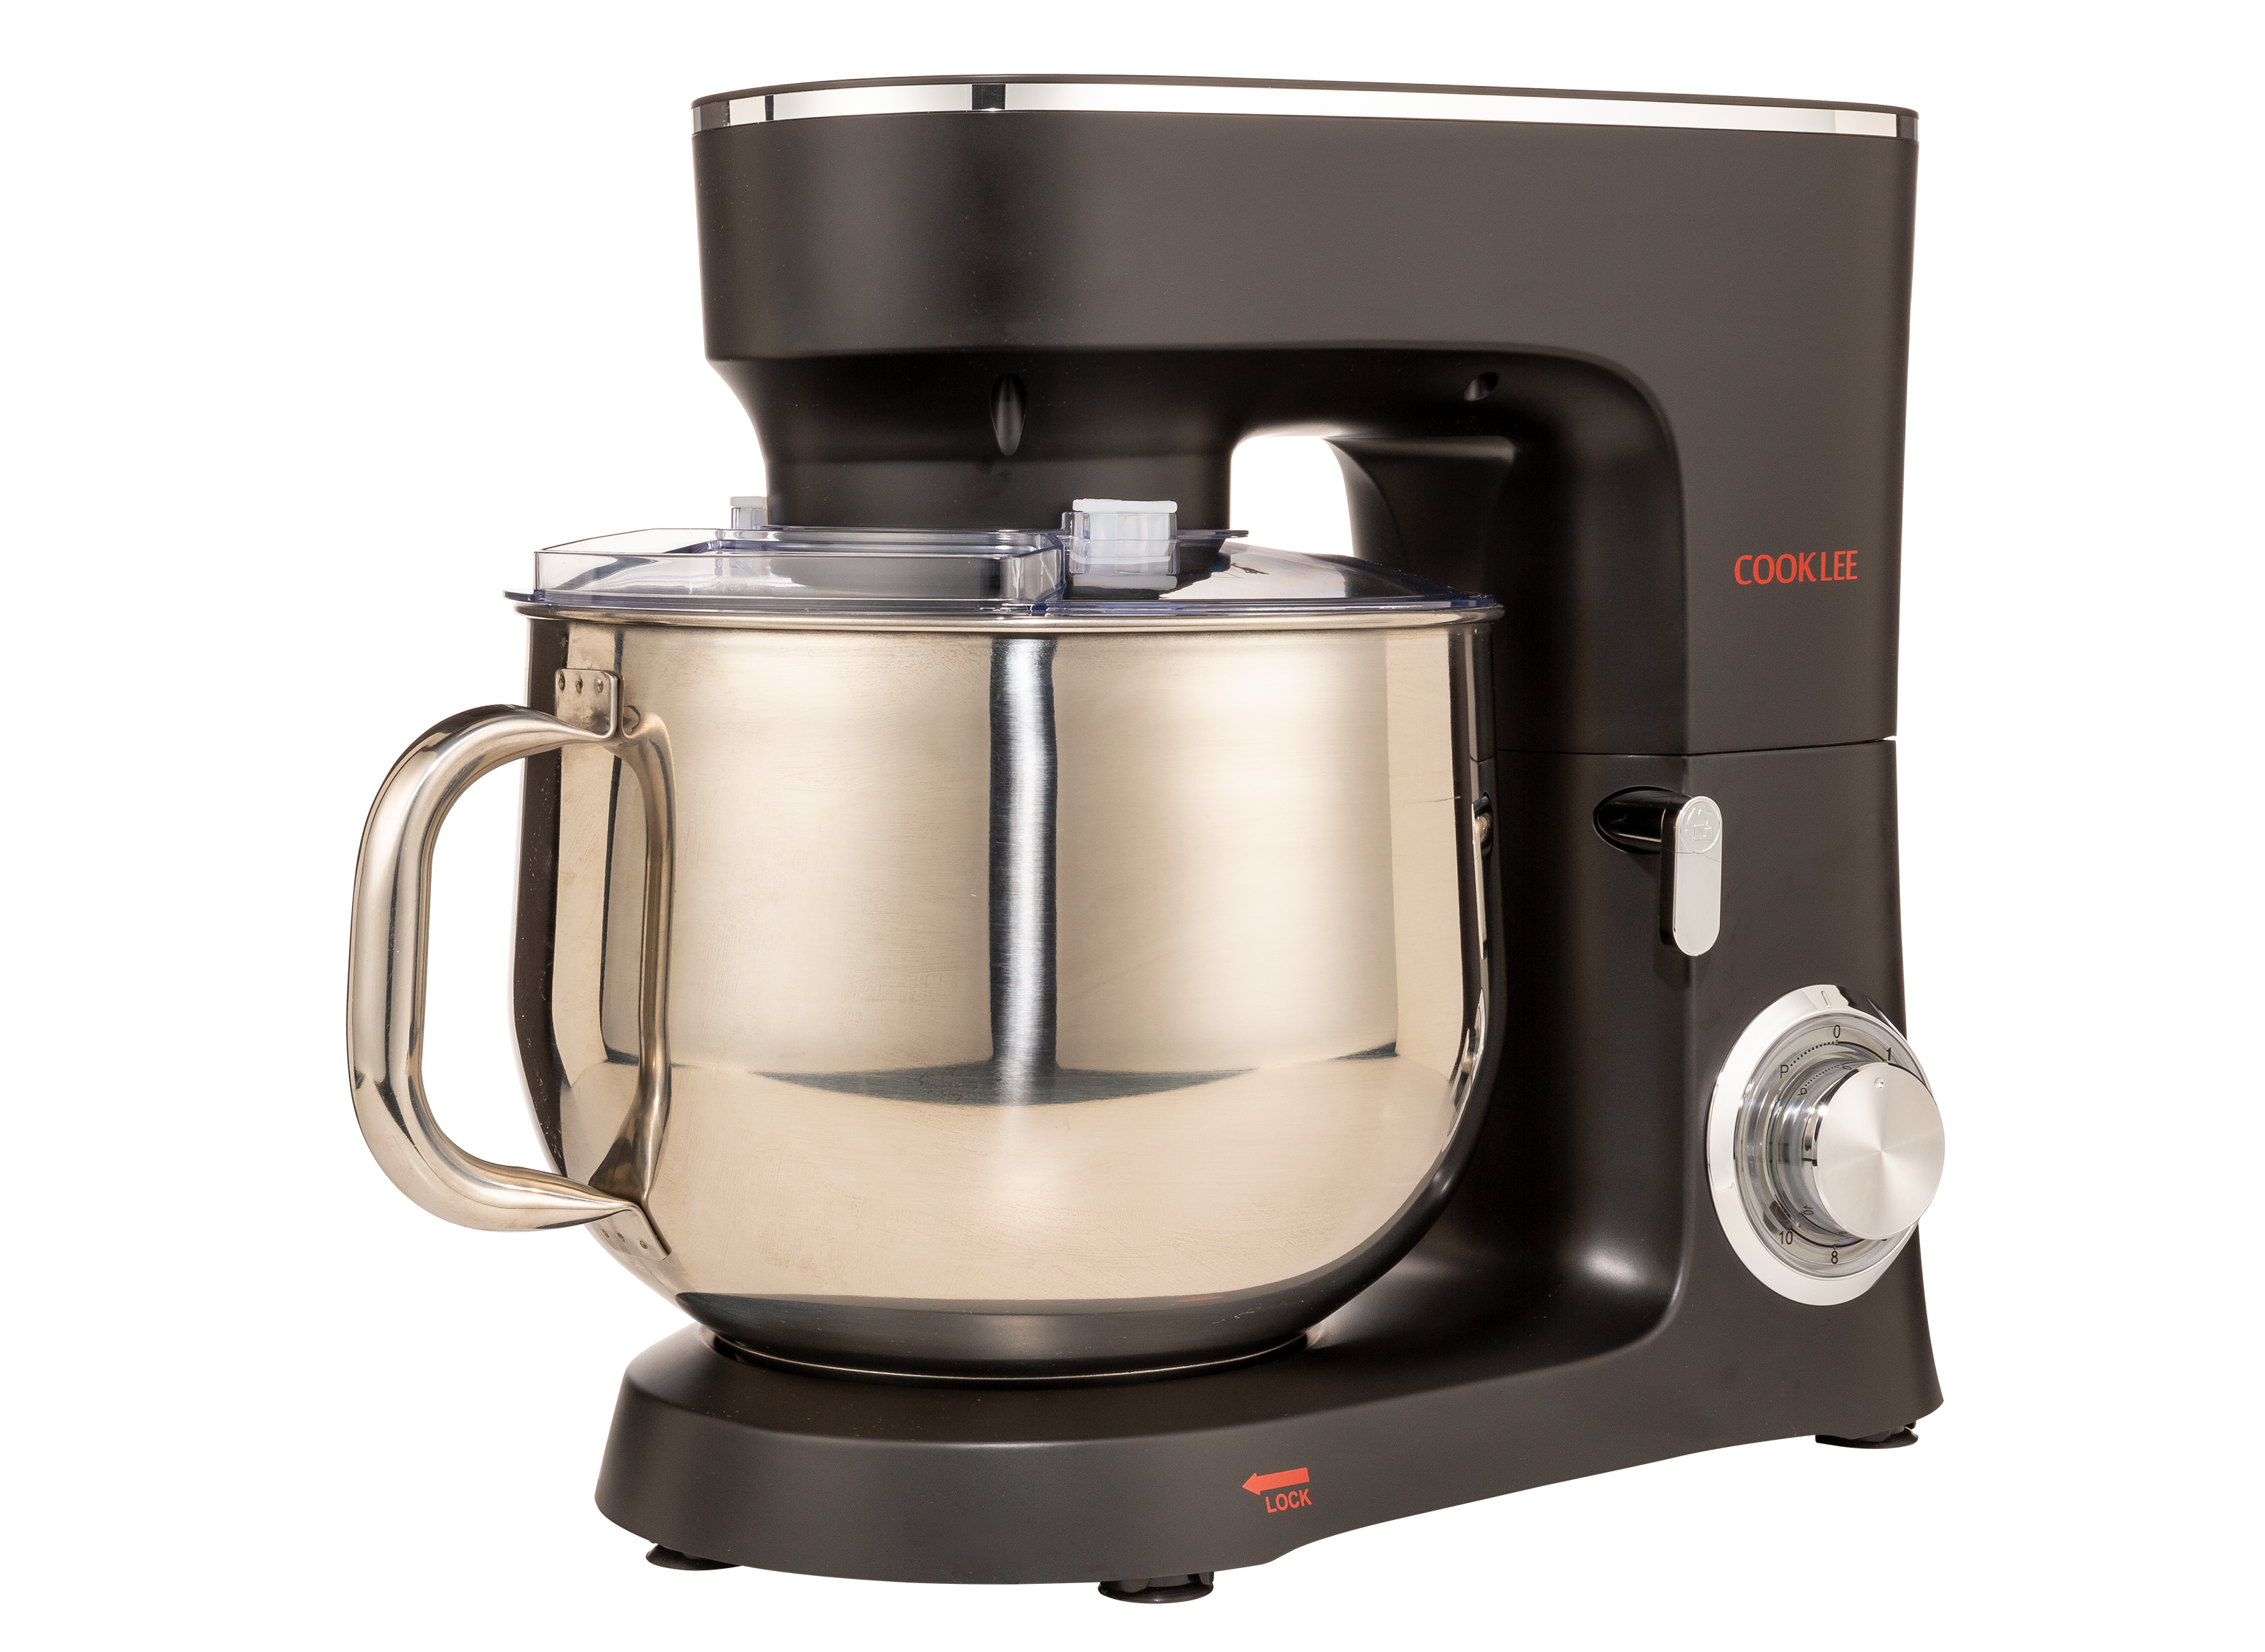 COOKLEE SM-1551 Mixer Review - Consumer Reports